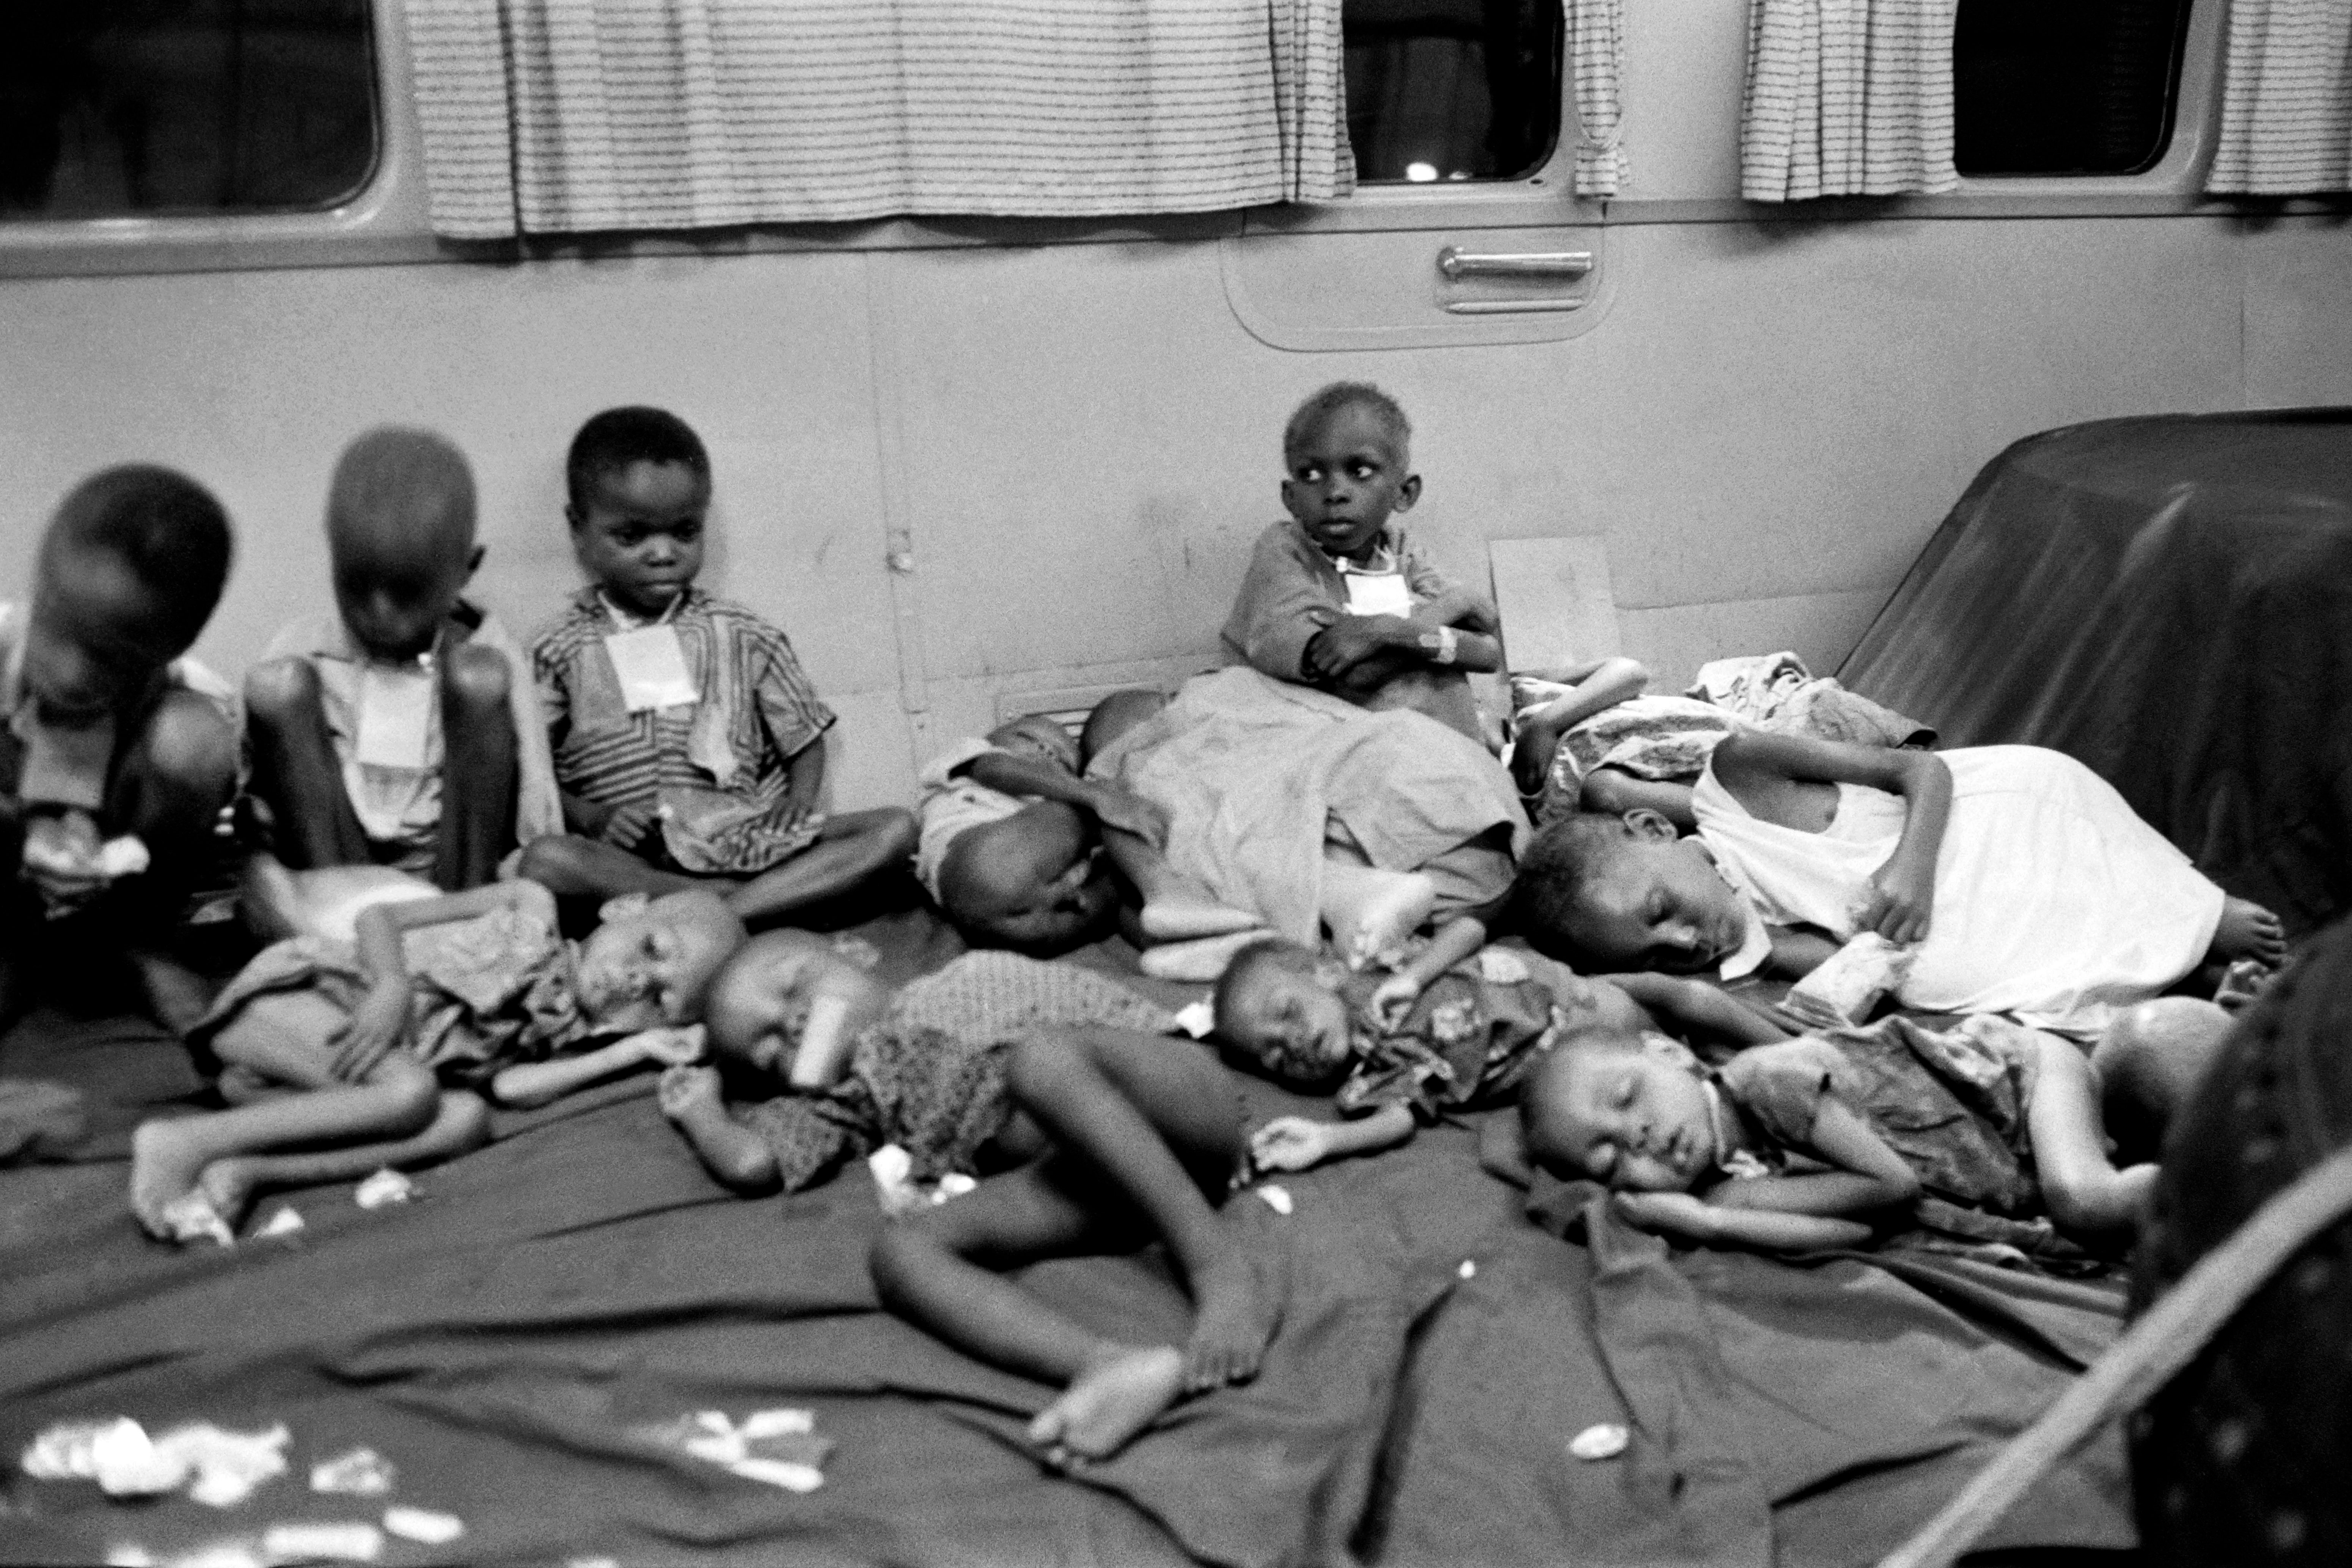 The ravages of the Biafran war killed almost 2 million people, most died from hunger and disease